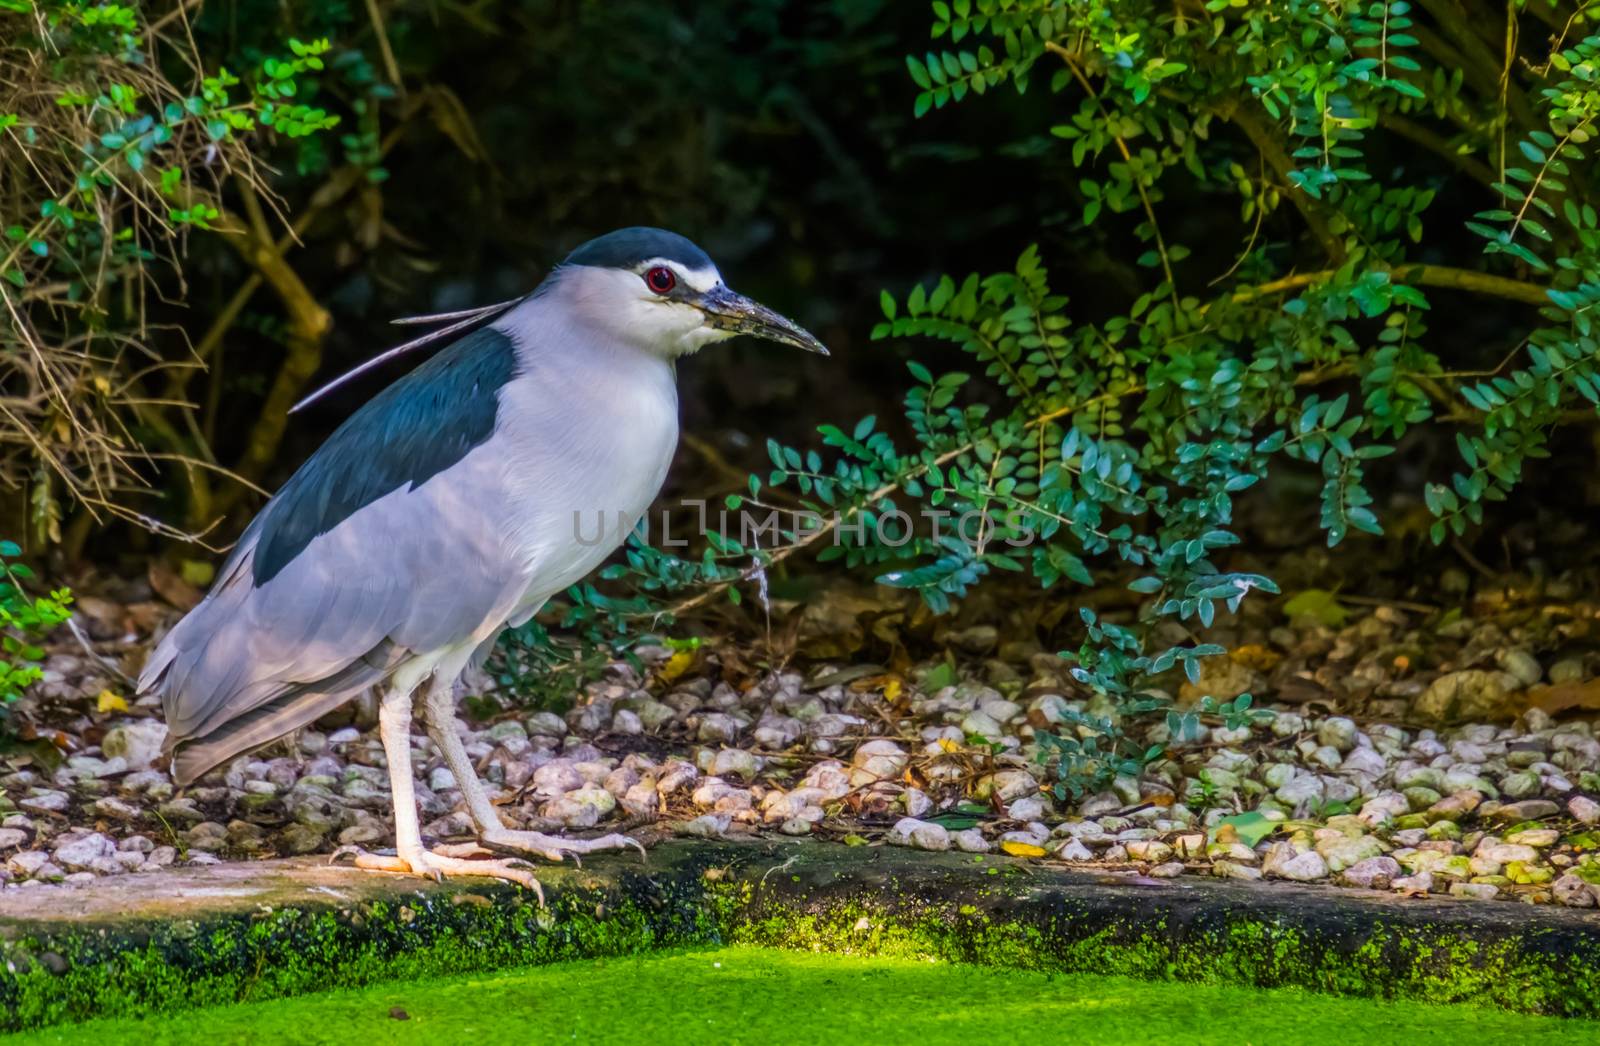 black crowned night heron standing at the water side, common Bird specie from Eurasia by charlottebleijenberg